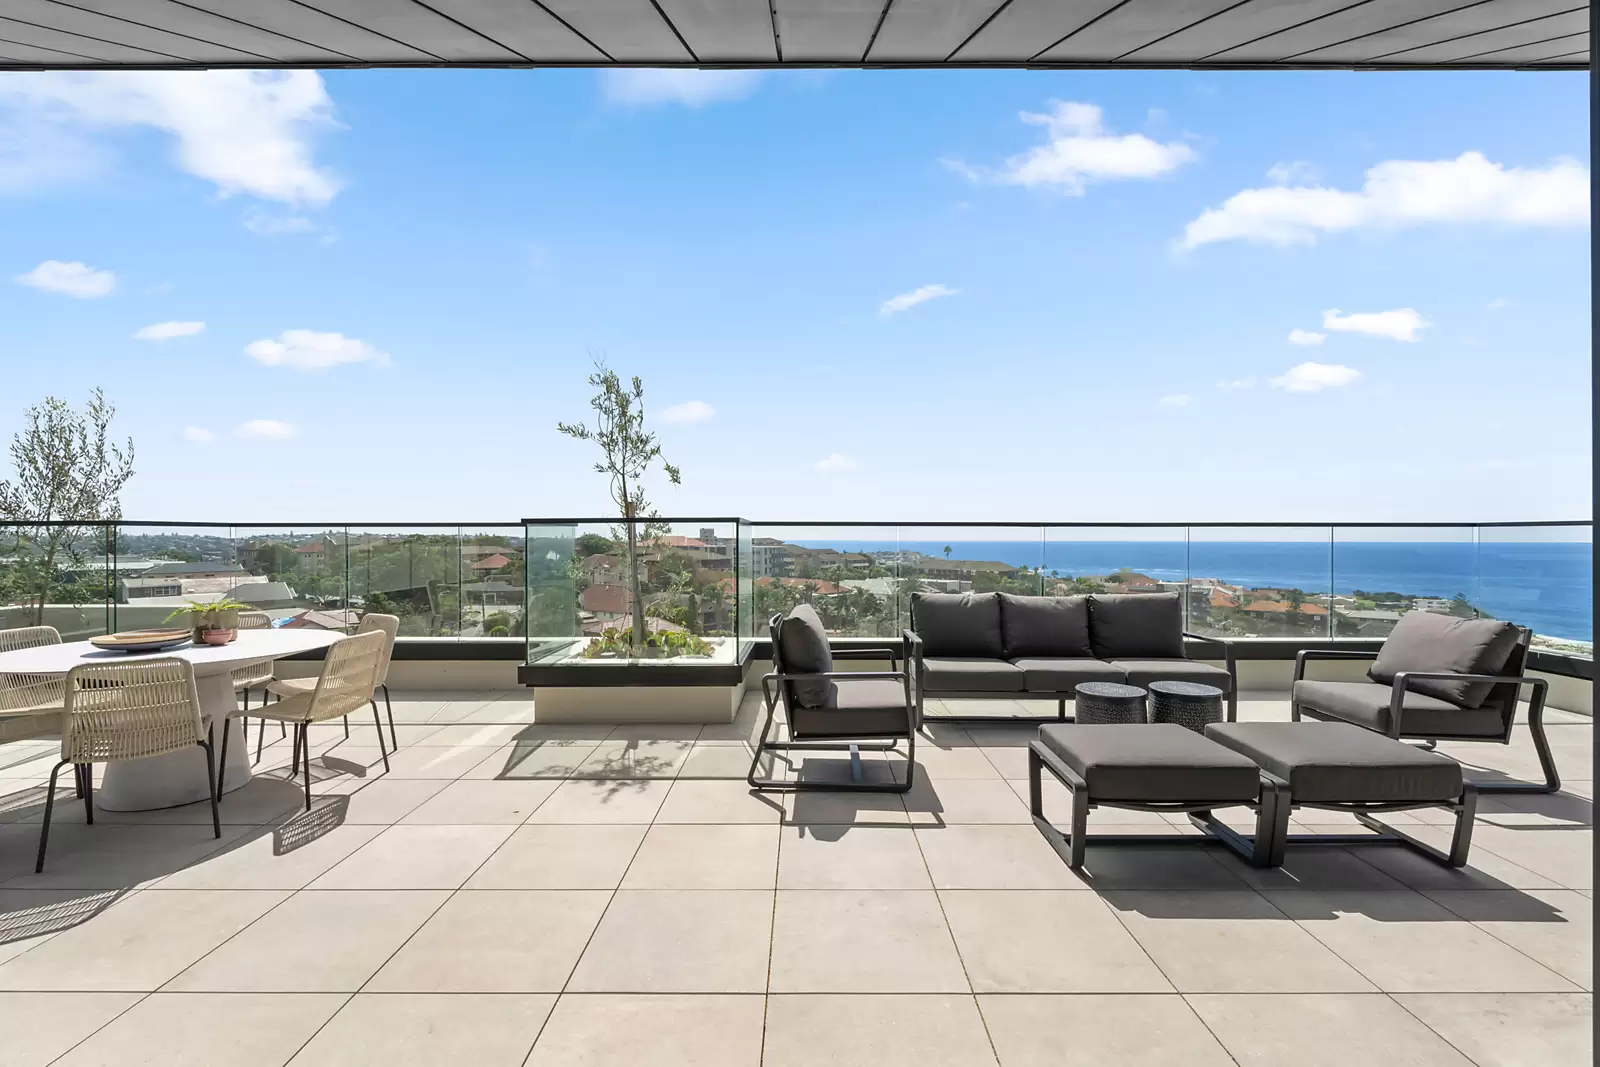 Penthouse 1 & 2 / Illawong Avenue, Tamarama For Sale by Sydney Sotheby's International Realty - image 5